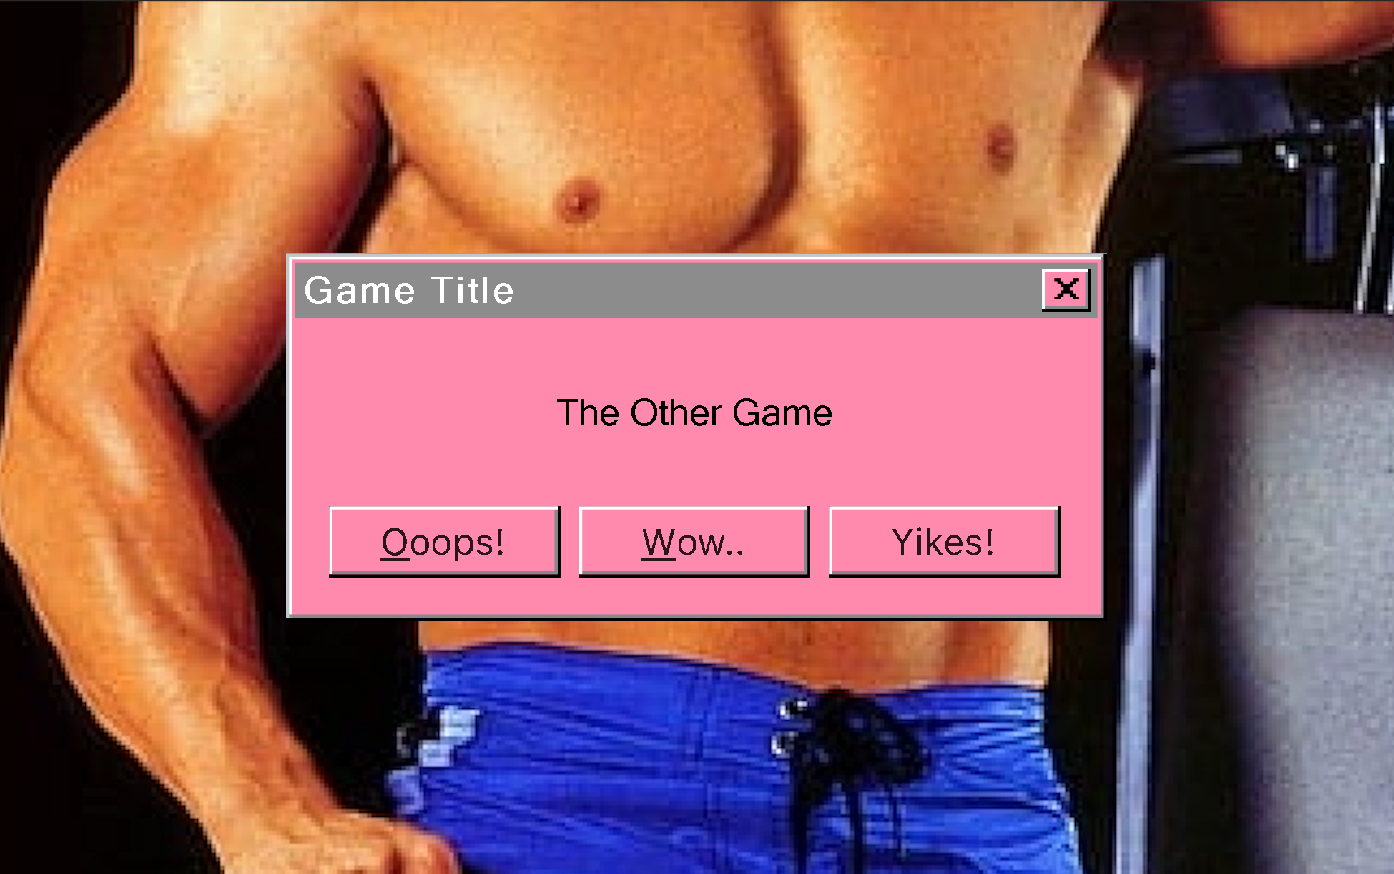 The Other Game